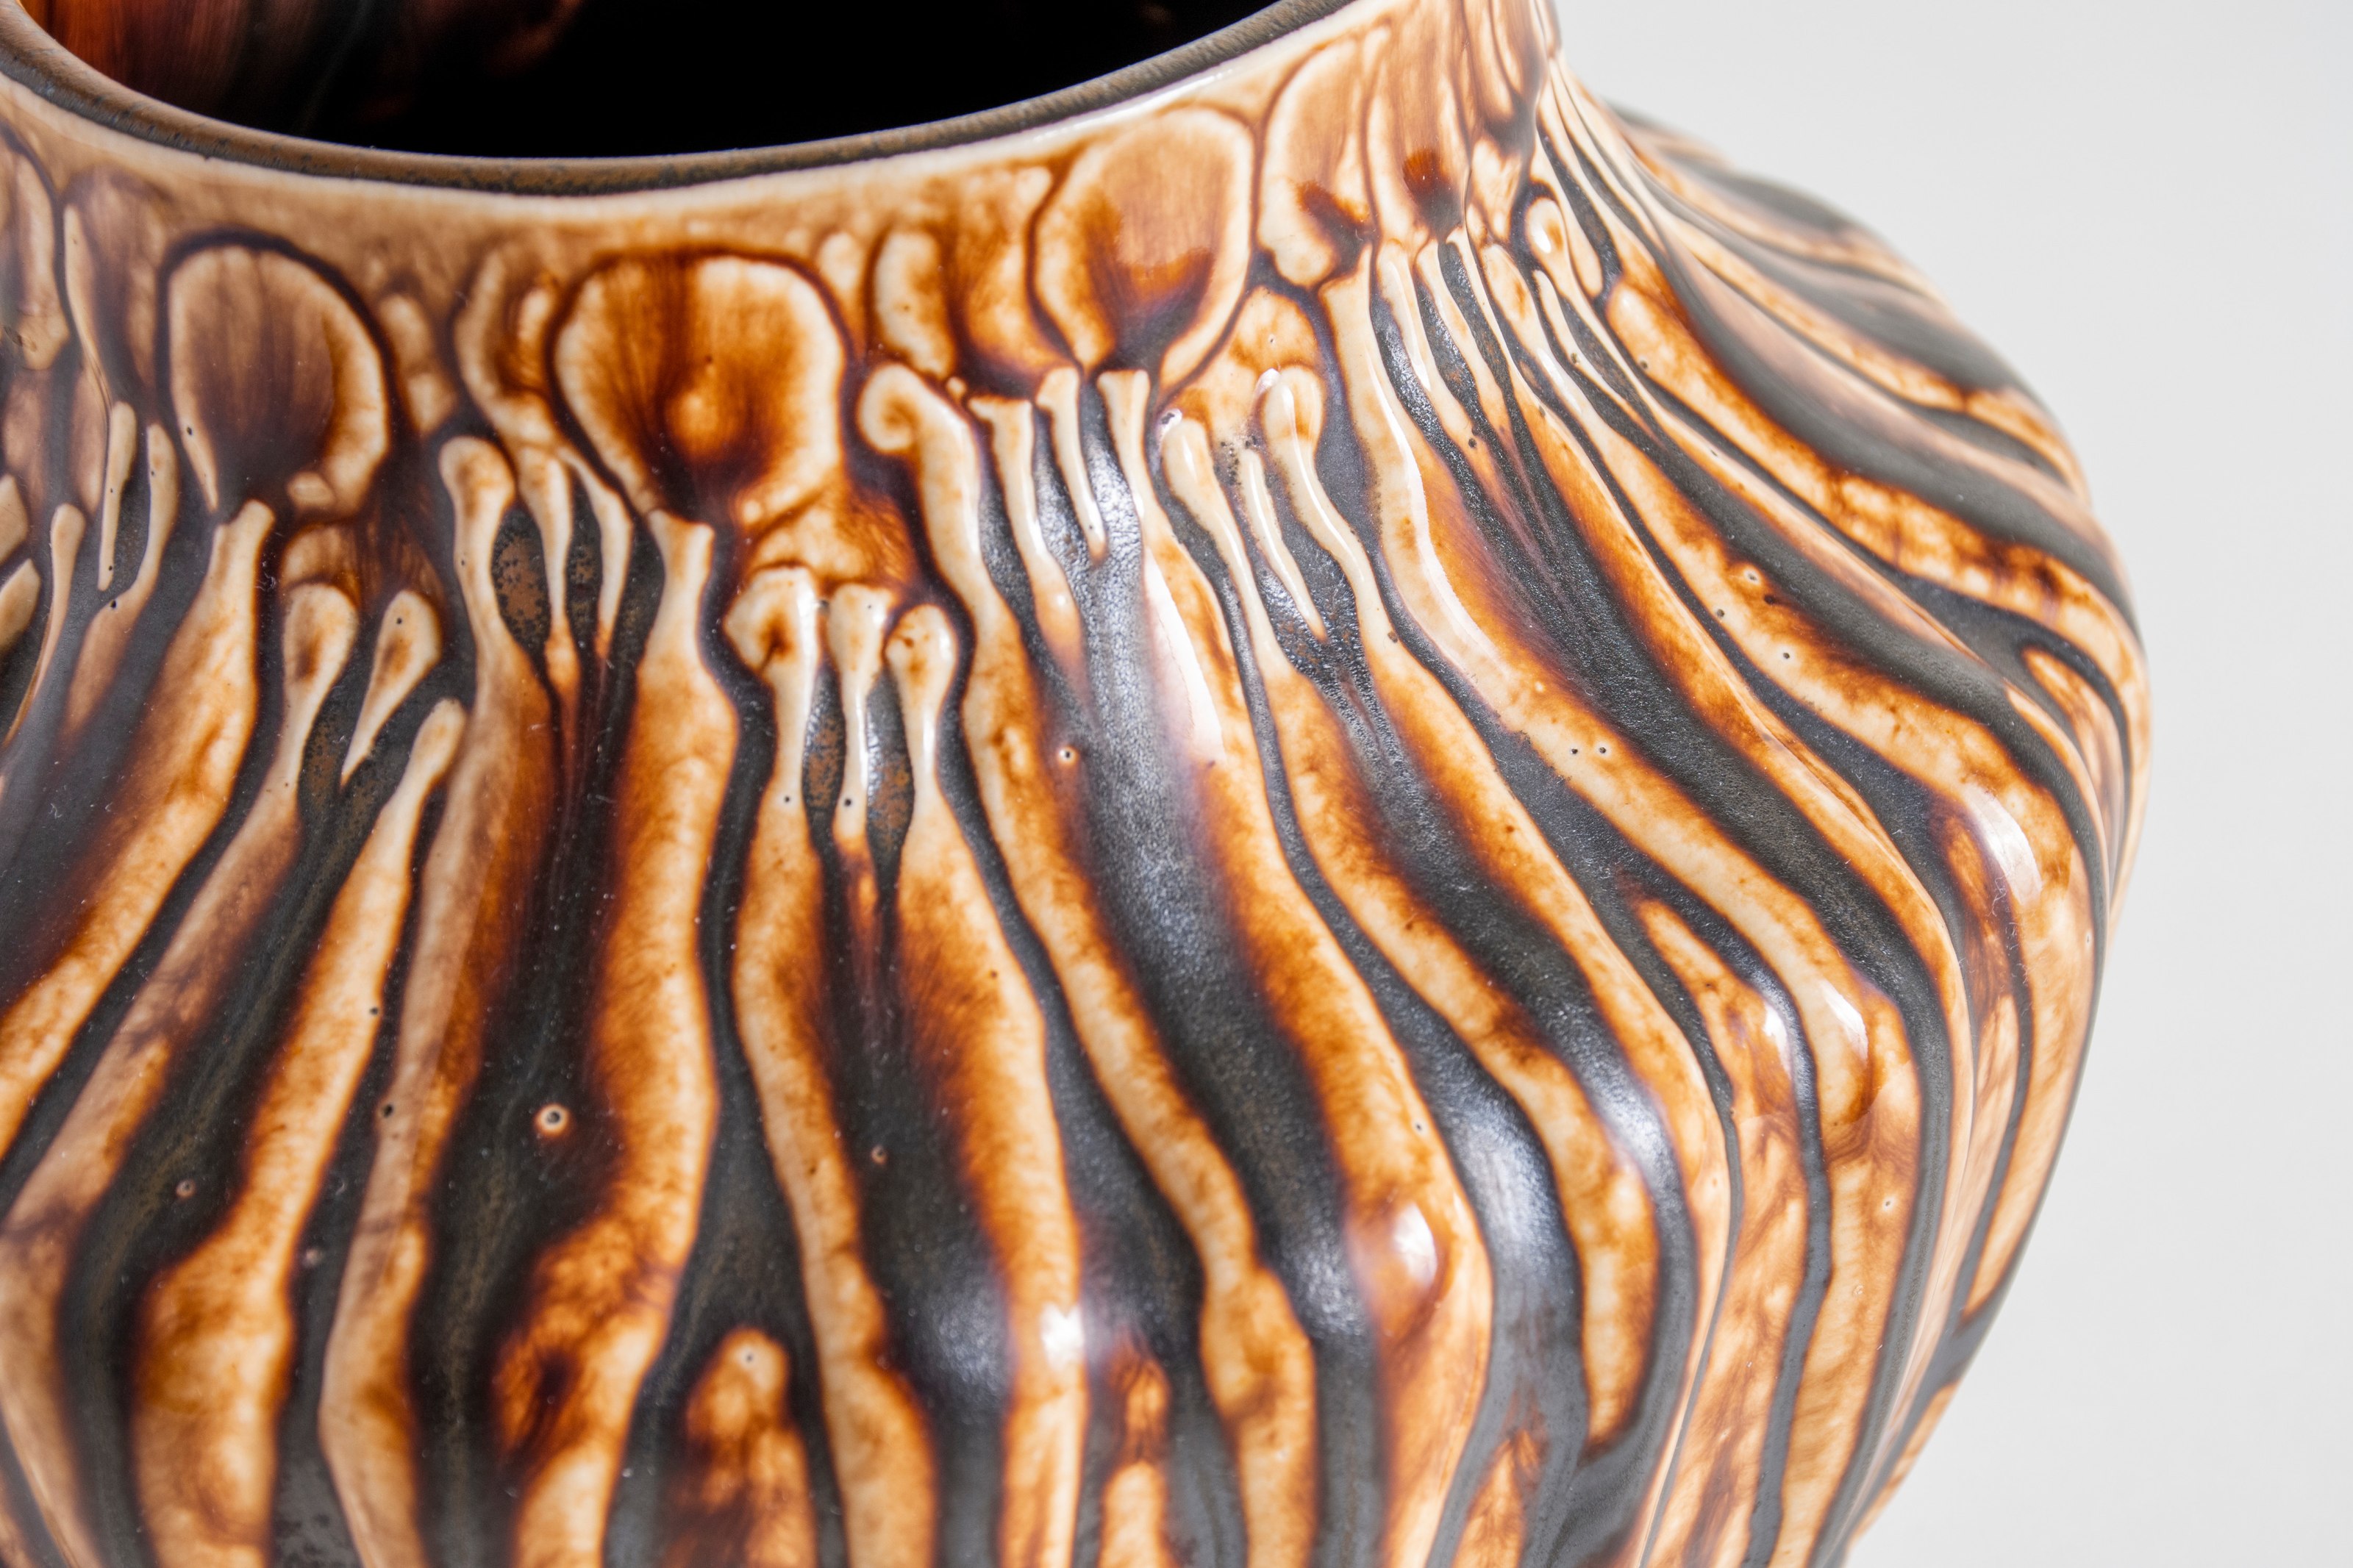 a favrile pottery bowl by tiffany studios, in a dark brown glossy glaze, depicting forest mushroom-like plants or sprouts.